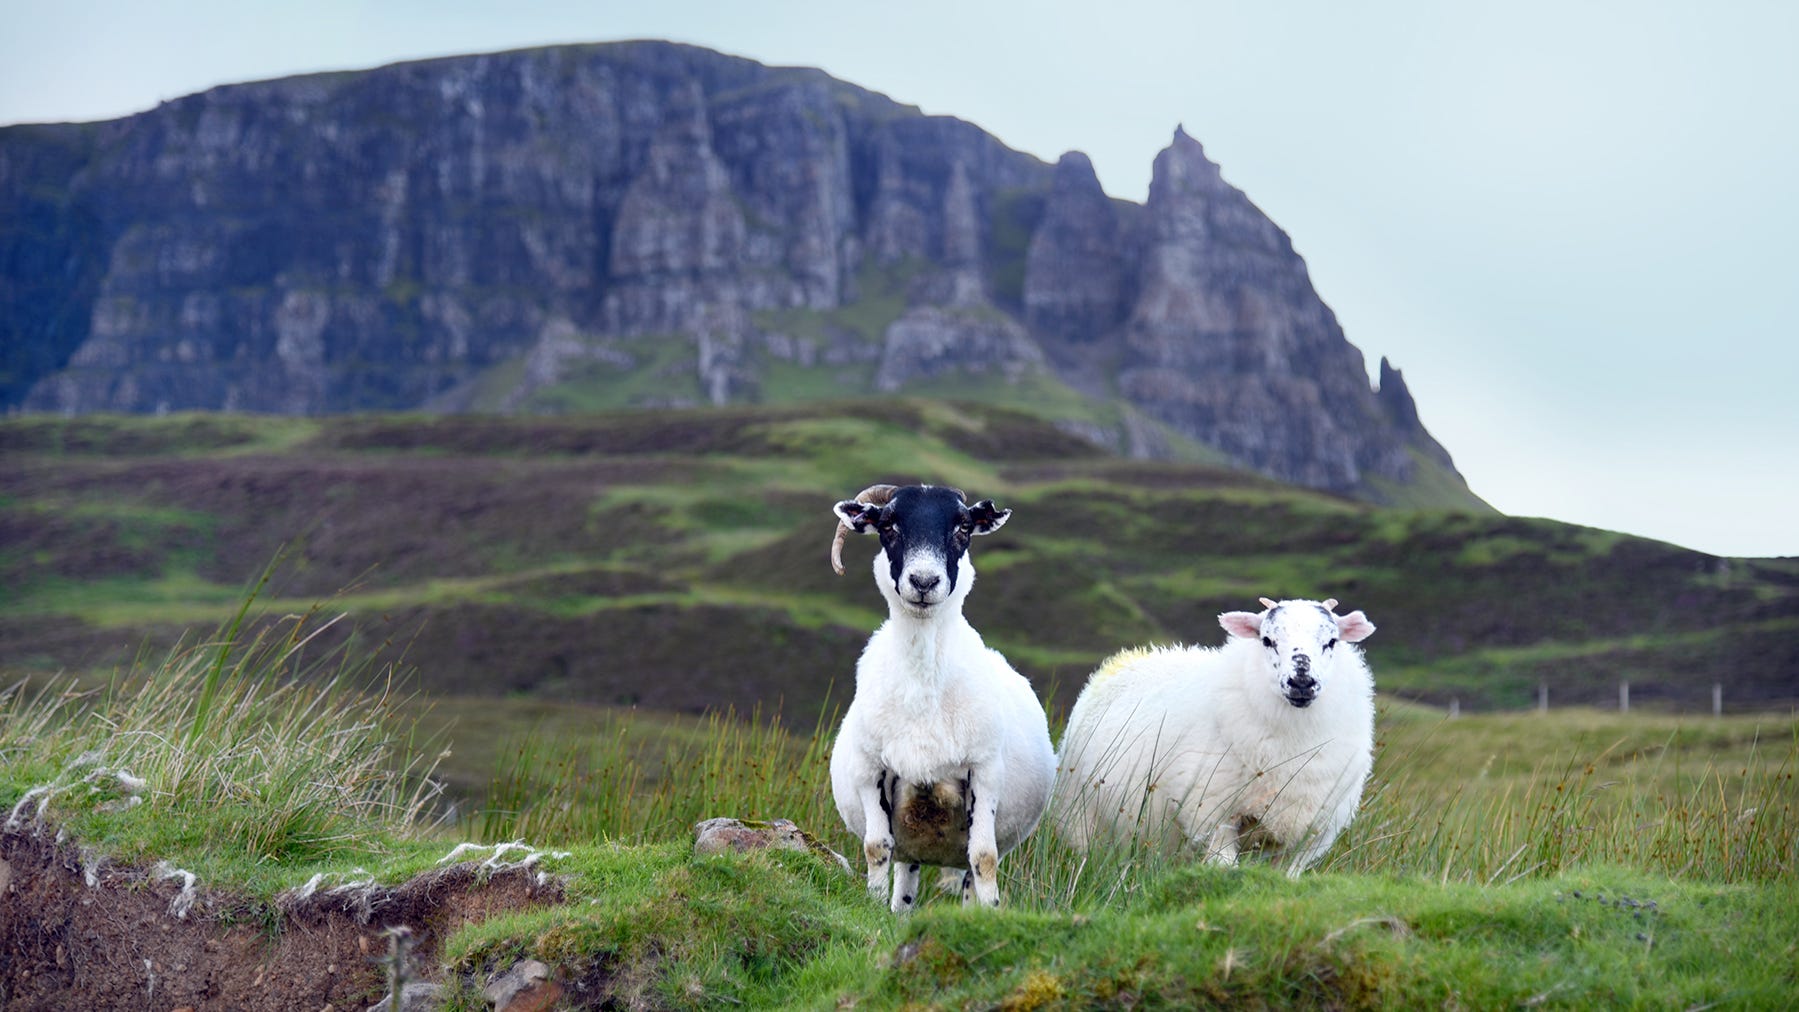 Scotland Isle of Skye is home to dramatic scenery, cliffs and castles